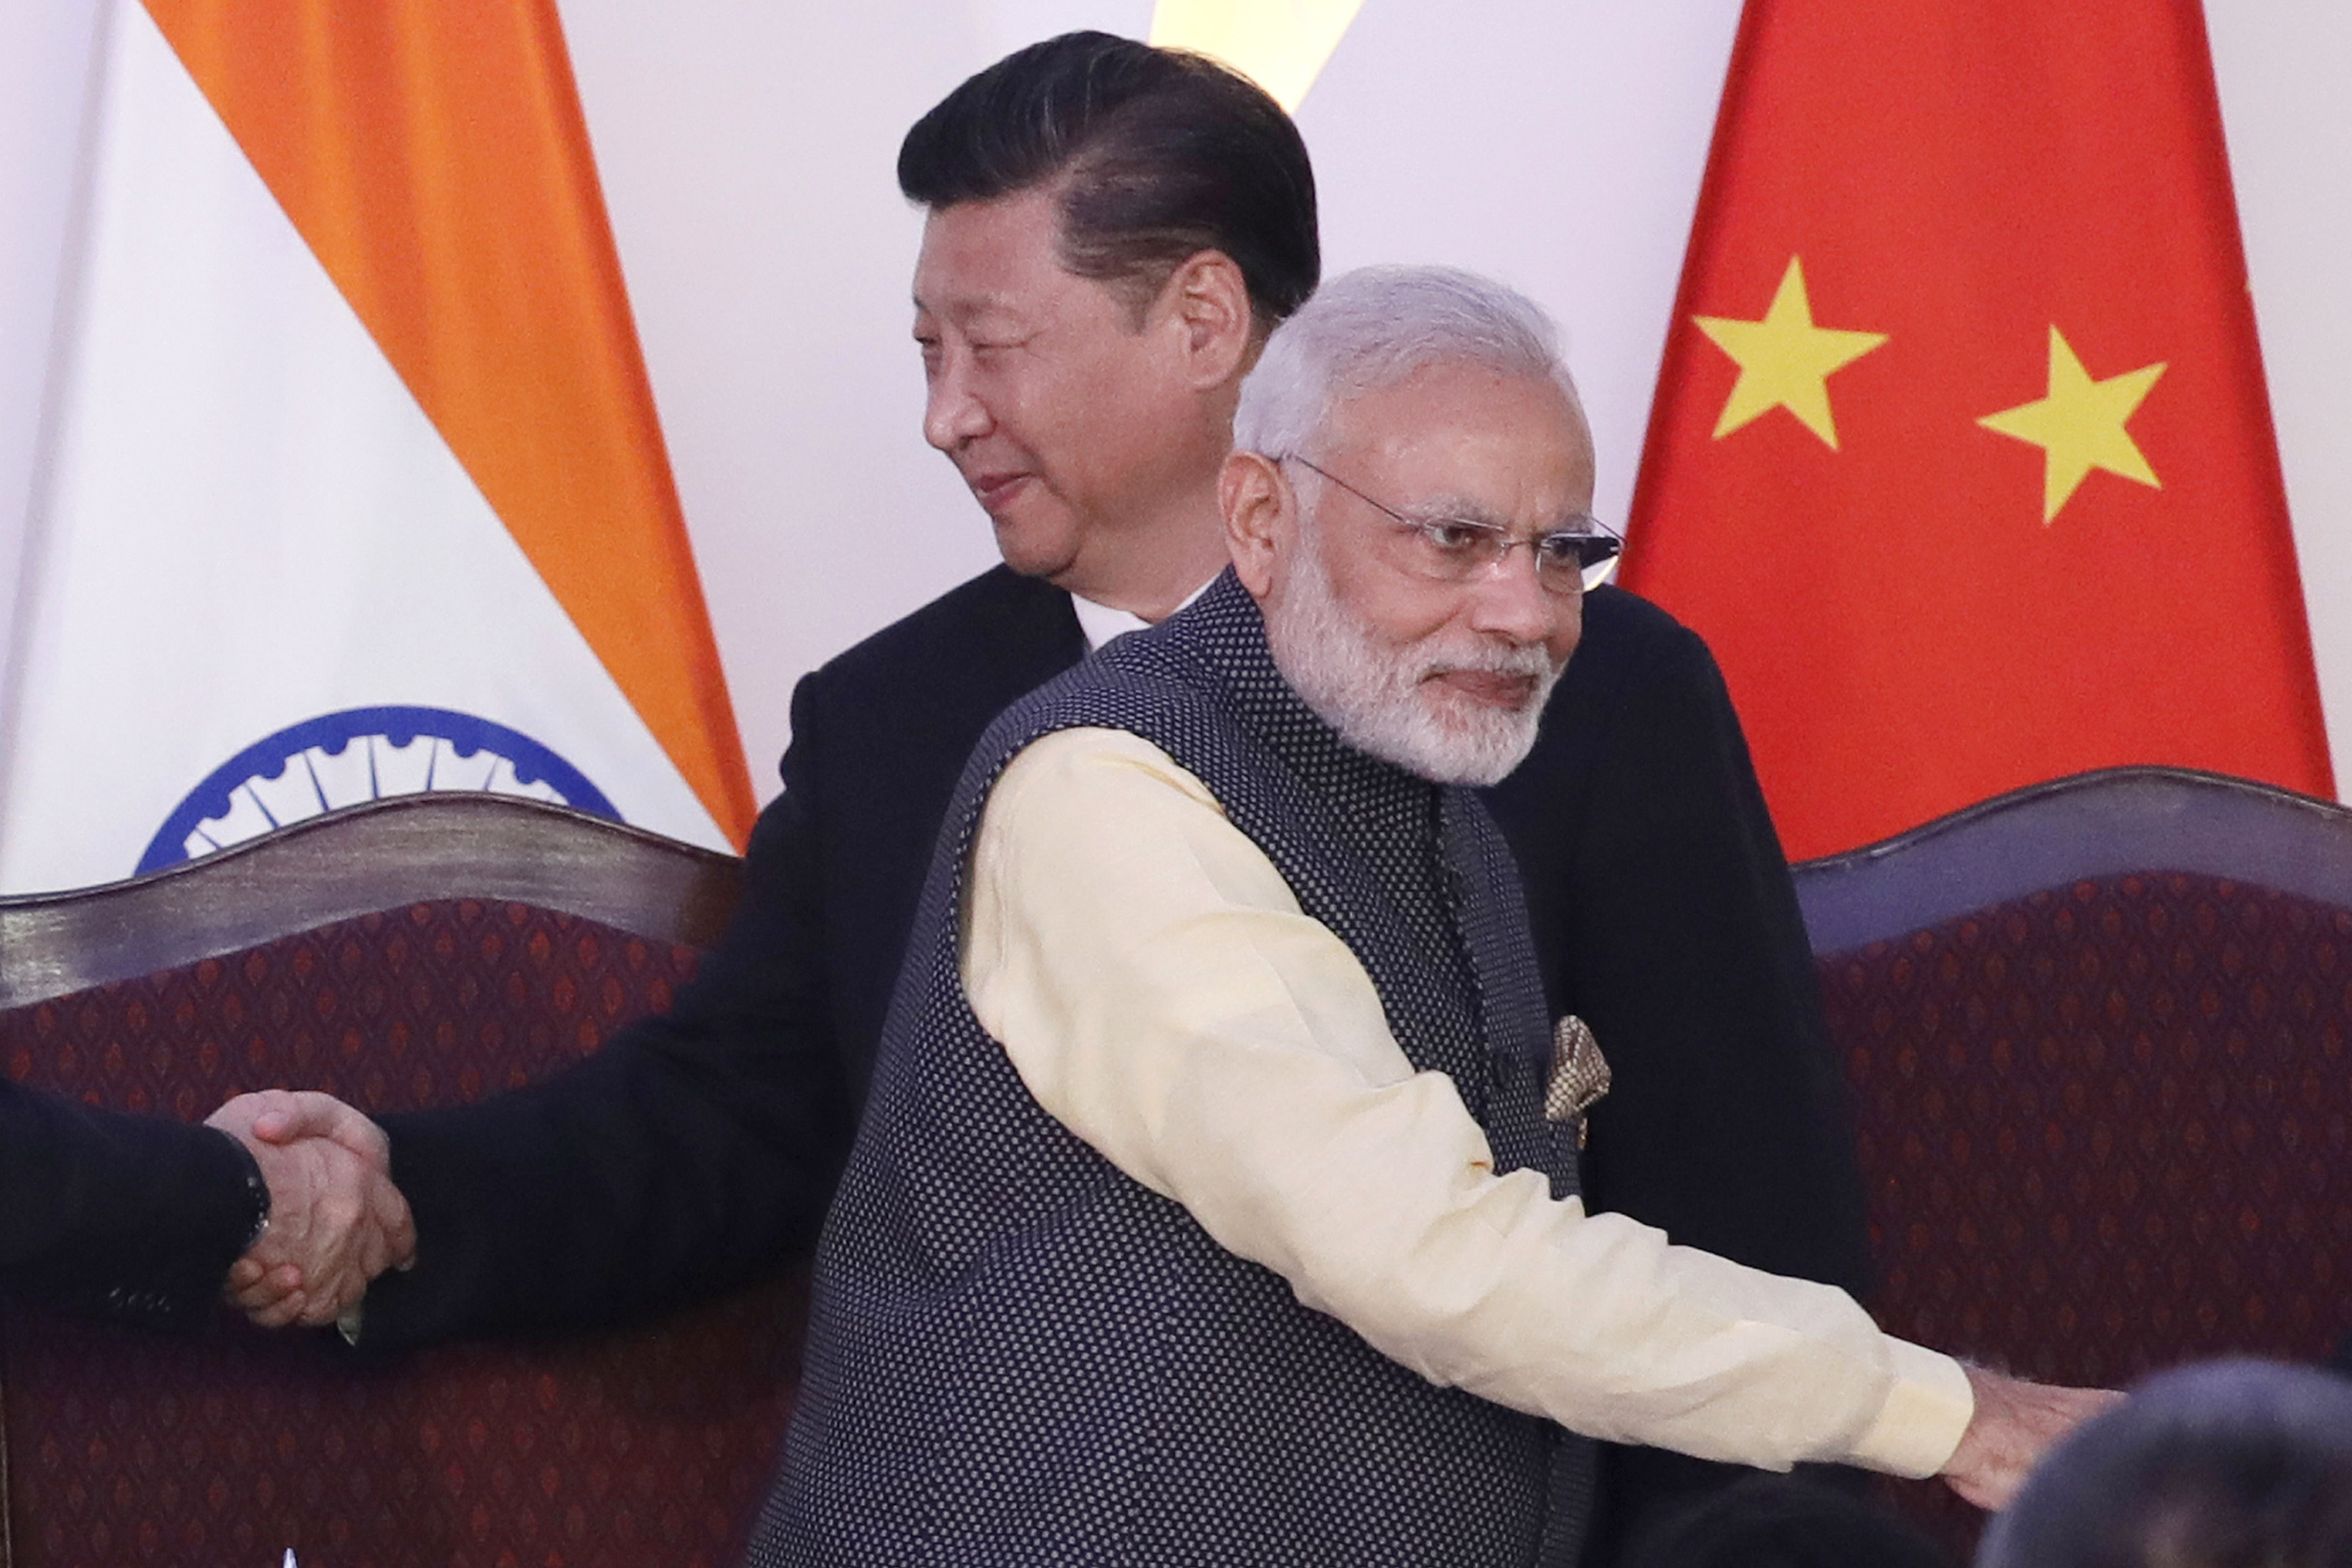 Indian Prime Minister Narendra Modi and Chinese President Xi Jinping at the BRICS summit in Goa in 2016. Photo: AP